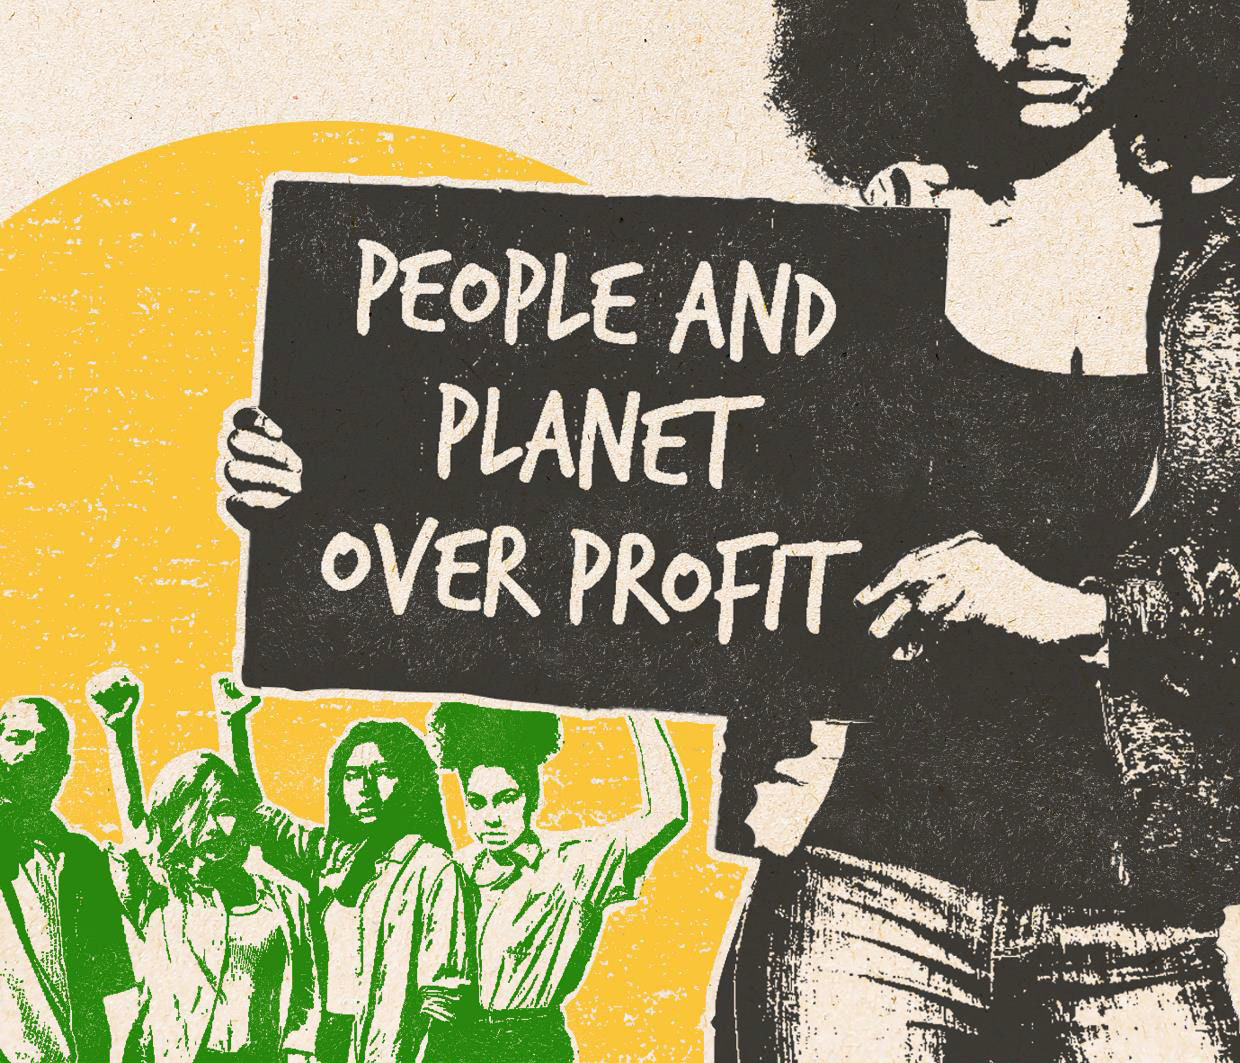 People and planet must be put before politics and profit